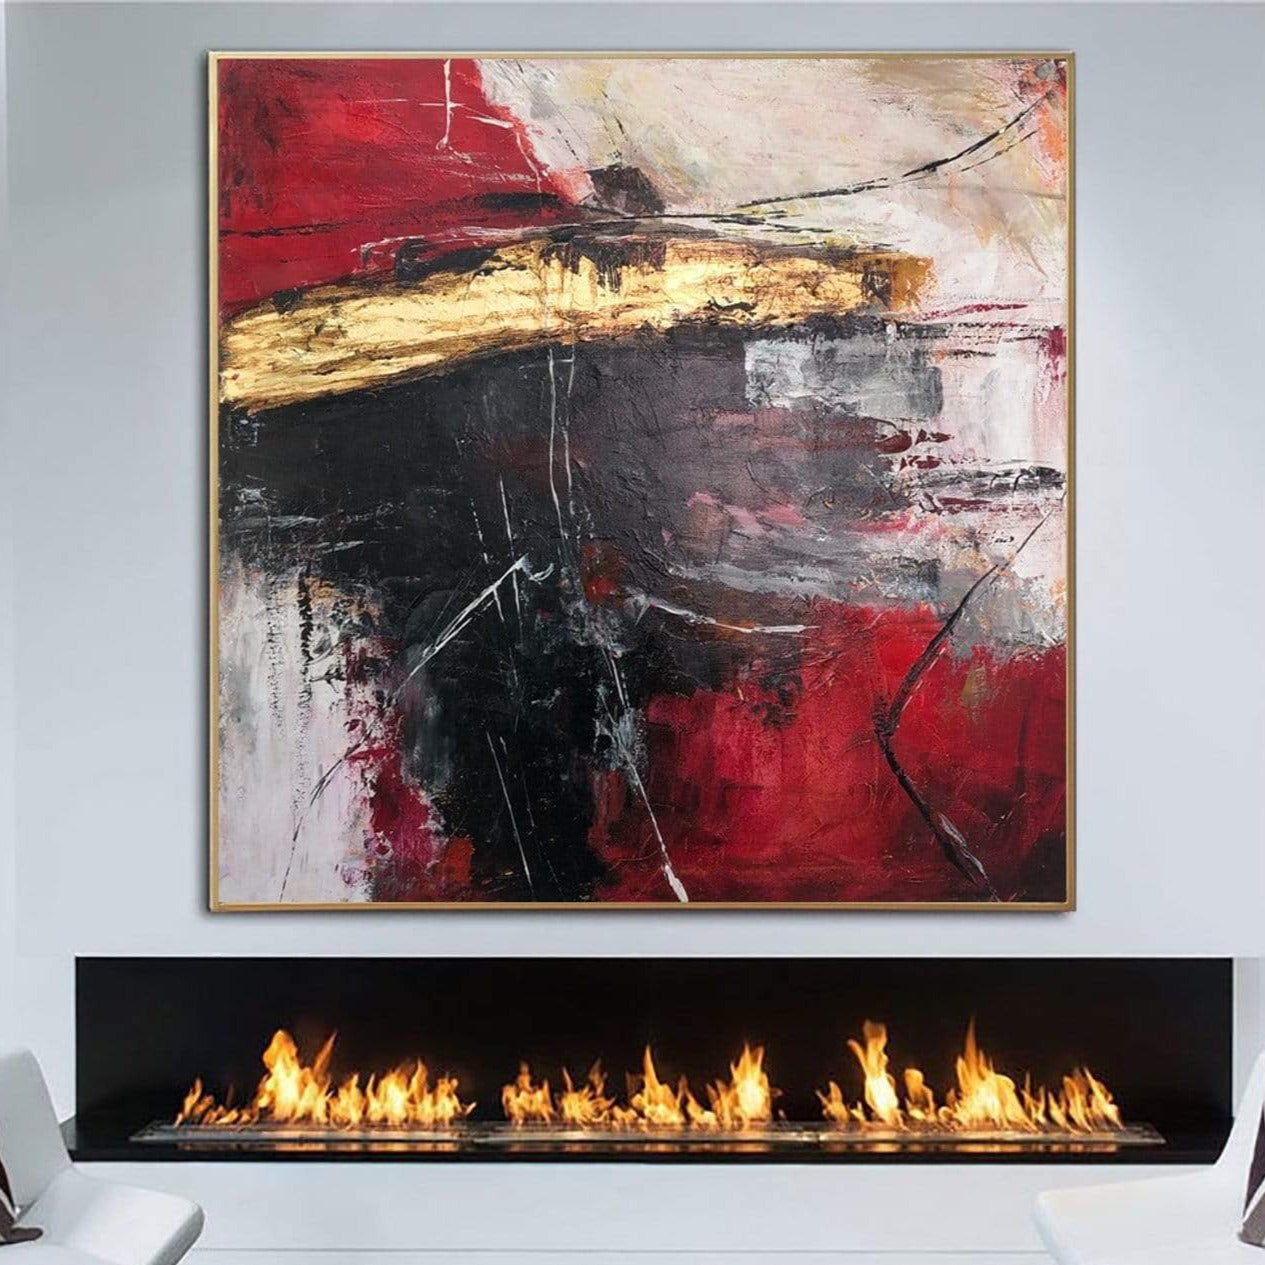 Paint it Black  Red art painting, Bedroom art painting, Painting